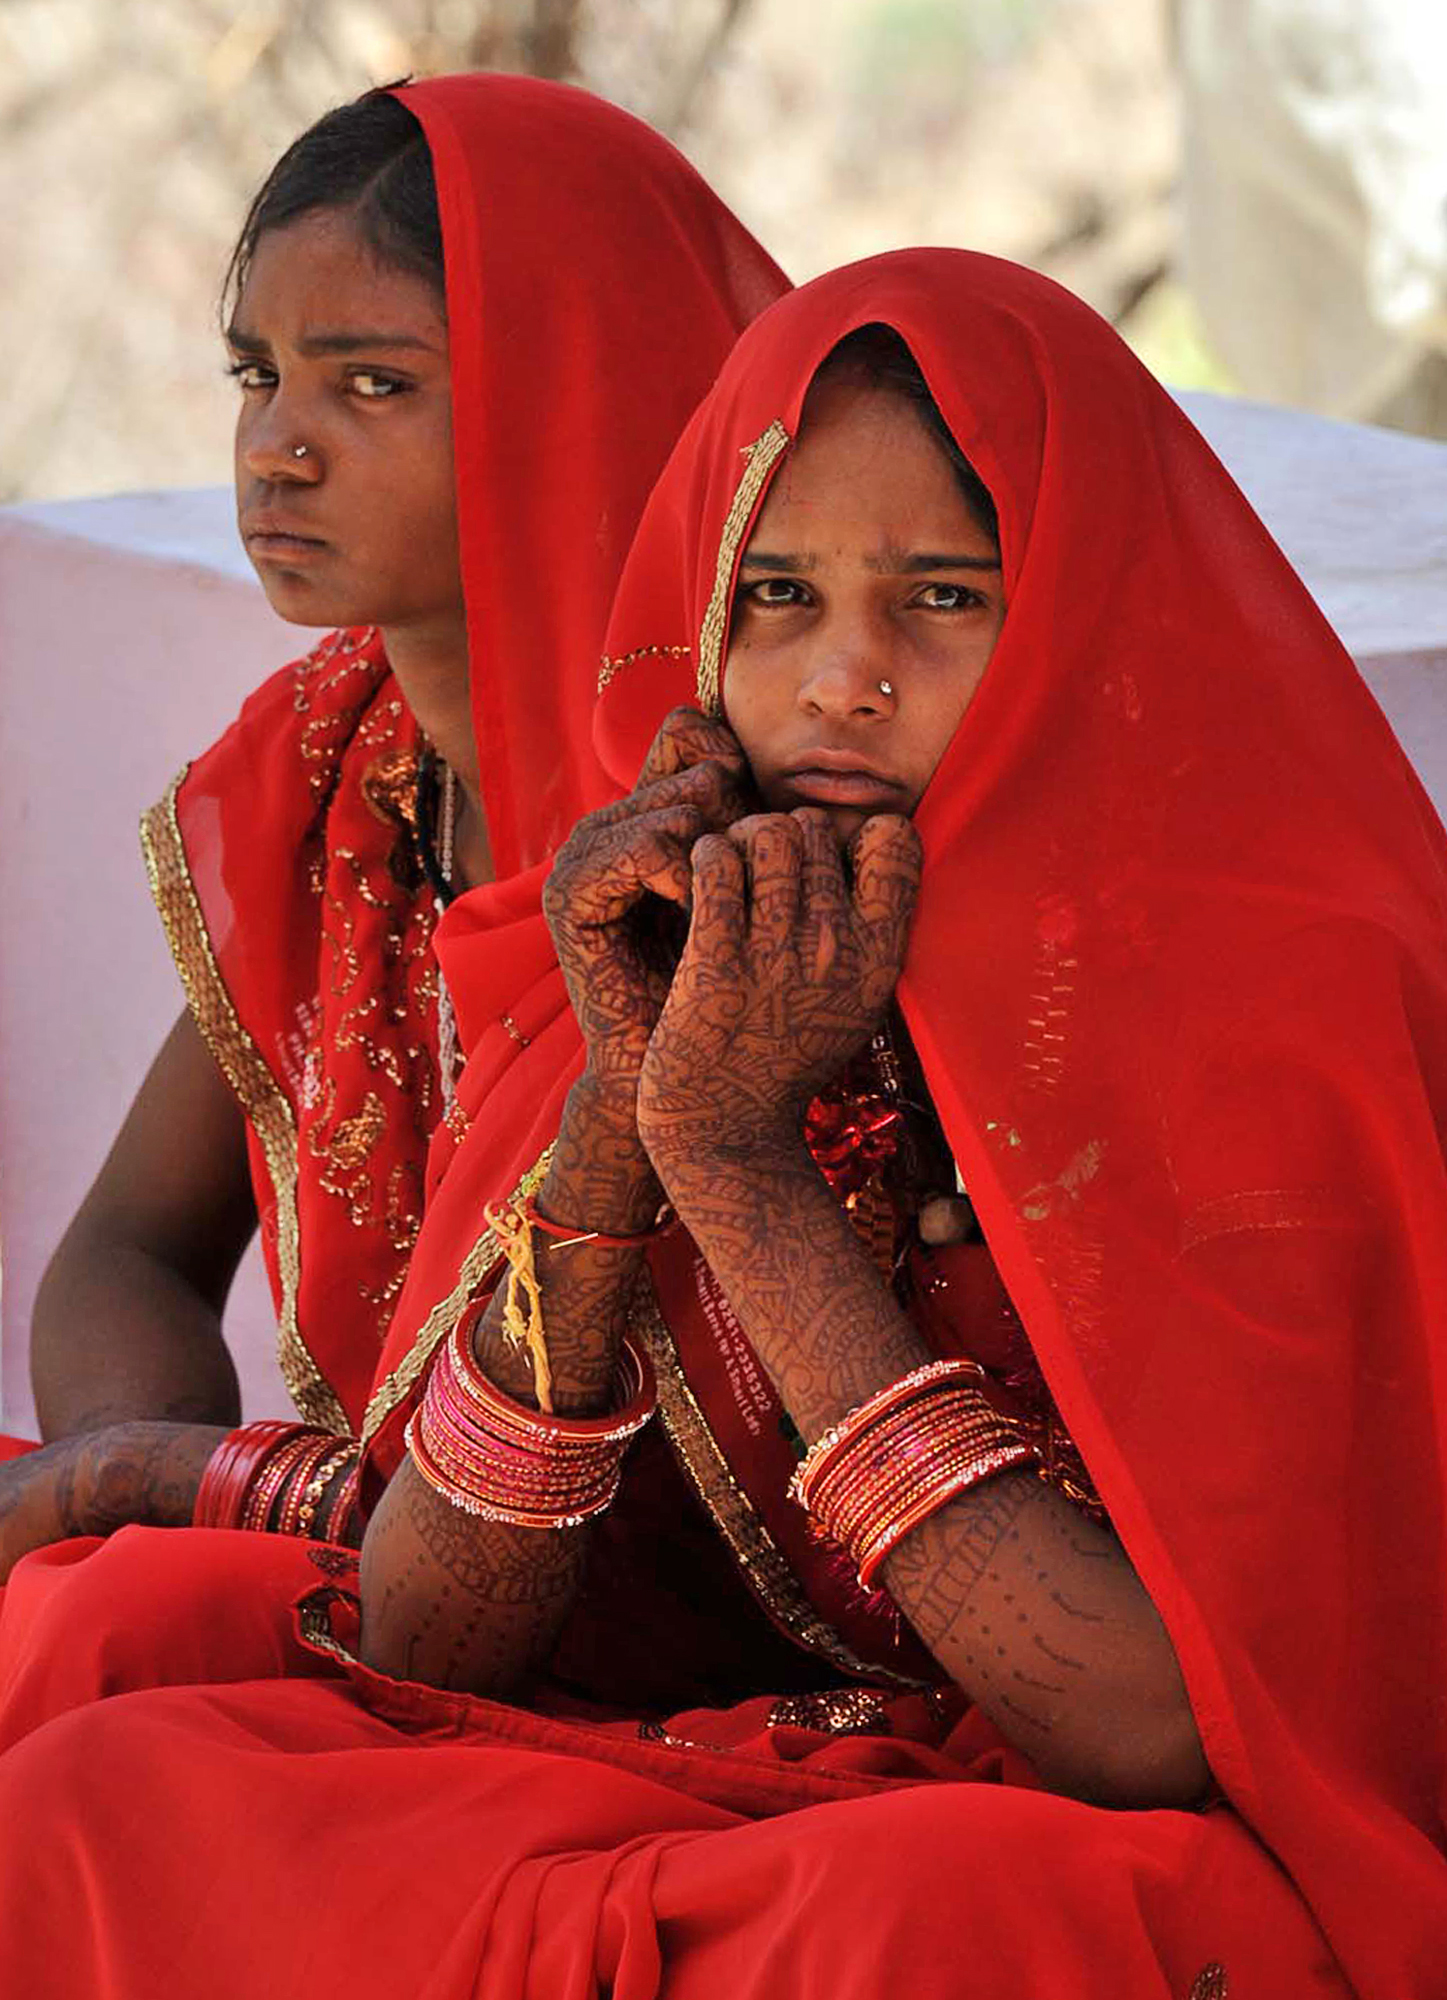 In this Friday, May 6, 2011 photo, child brides Chinti Bai, 12, left,  and Anita, 12, sit outside the Maa Jalapa Devi temple after their marriage ceremony in Rajgarh, about 155 kilometers (96 miles) from Bhopal, India. Ignoring laws that ban child marriages, several young children, are still married off as part of centuries-old custom in some Indian villages. India law prohibits marriage for women younger than 18 and men under age 21. (AP Photo/Prakash Hatvalne)